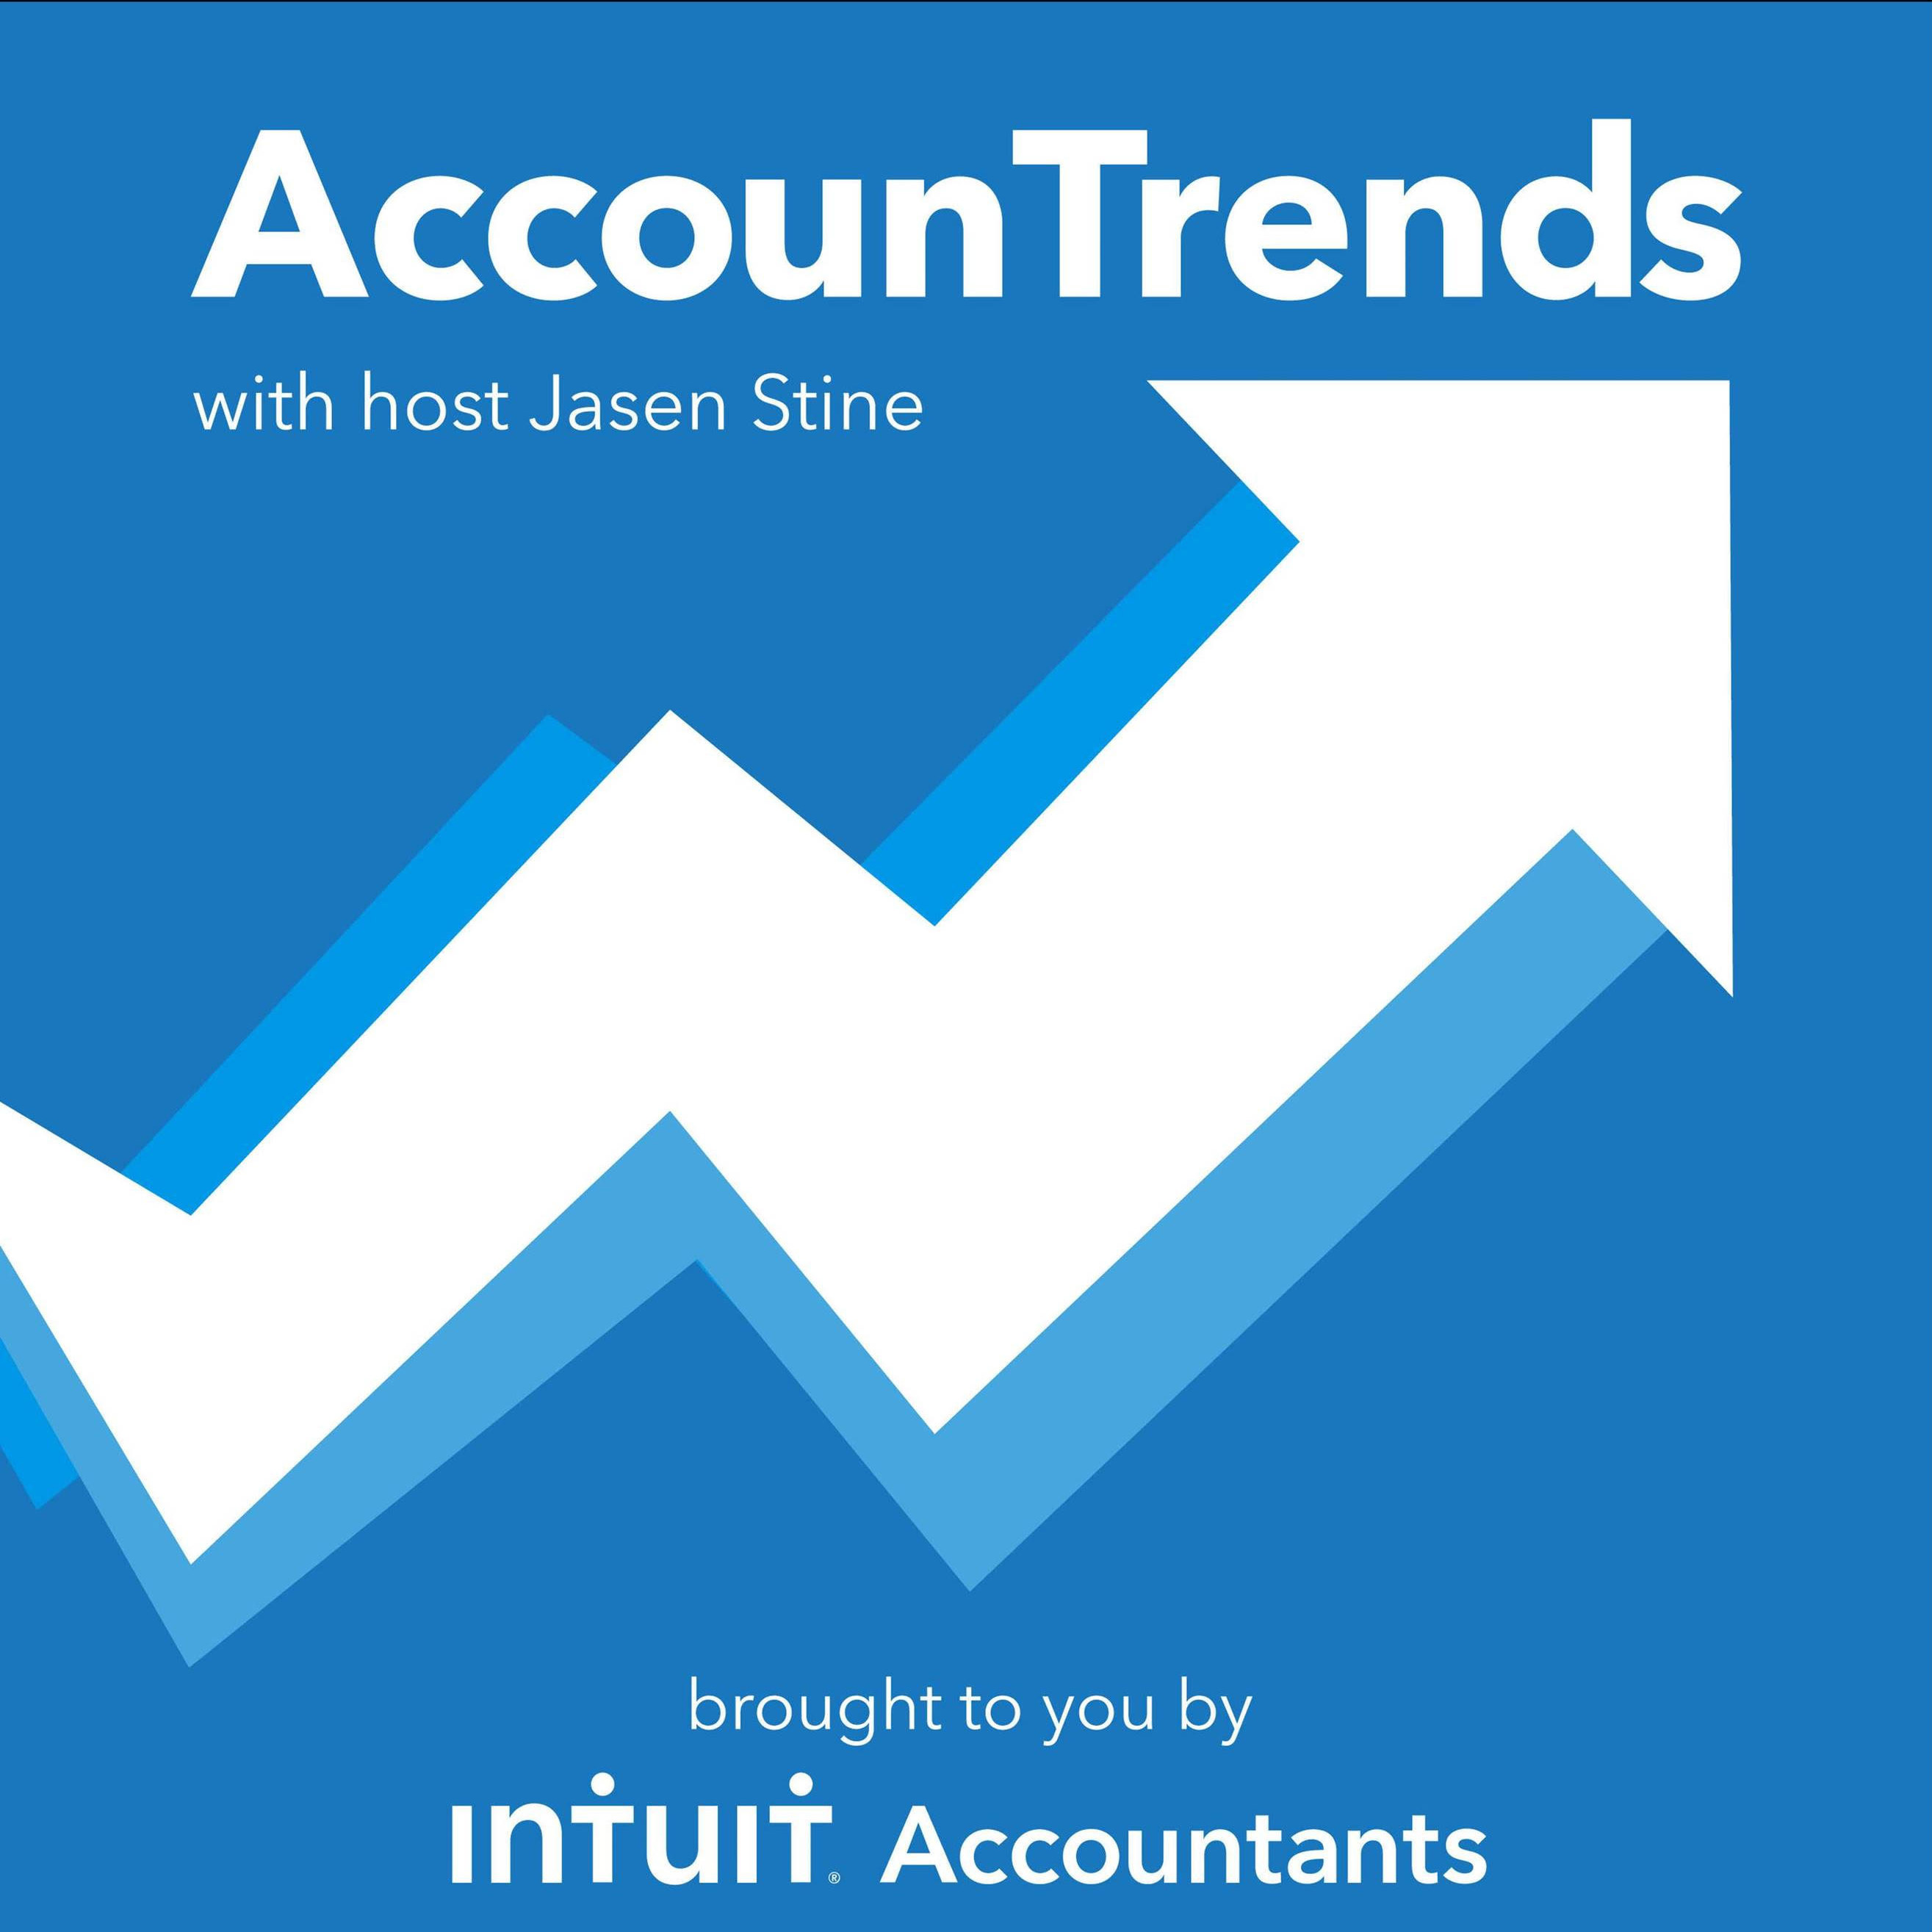 AccounTrends